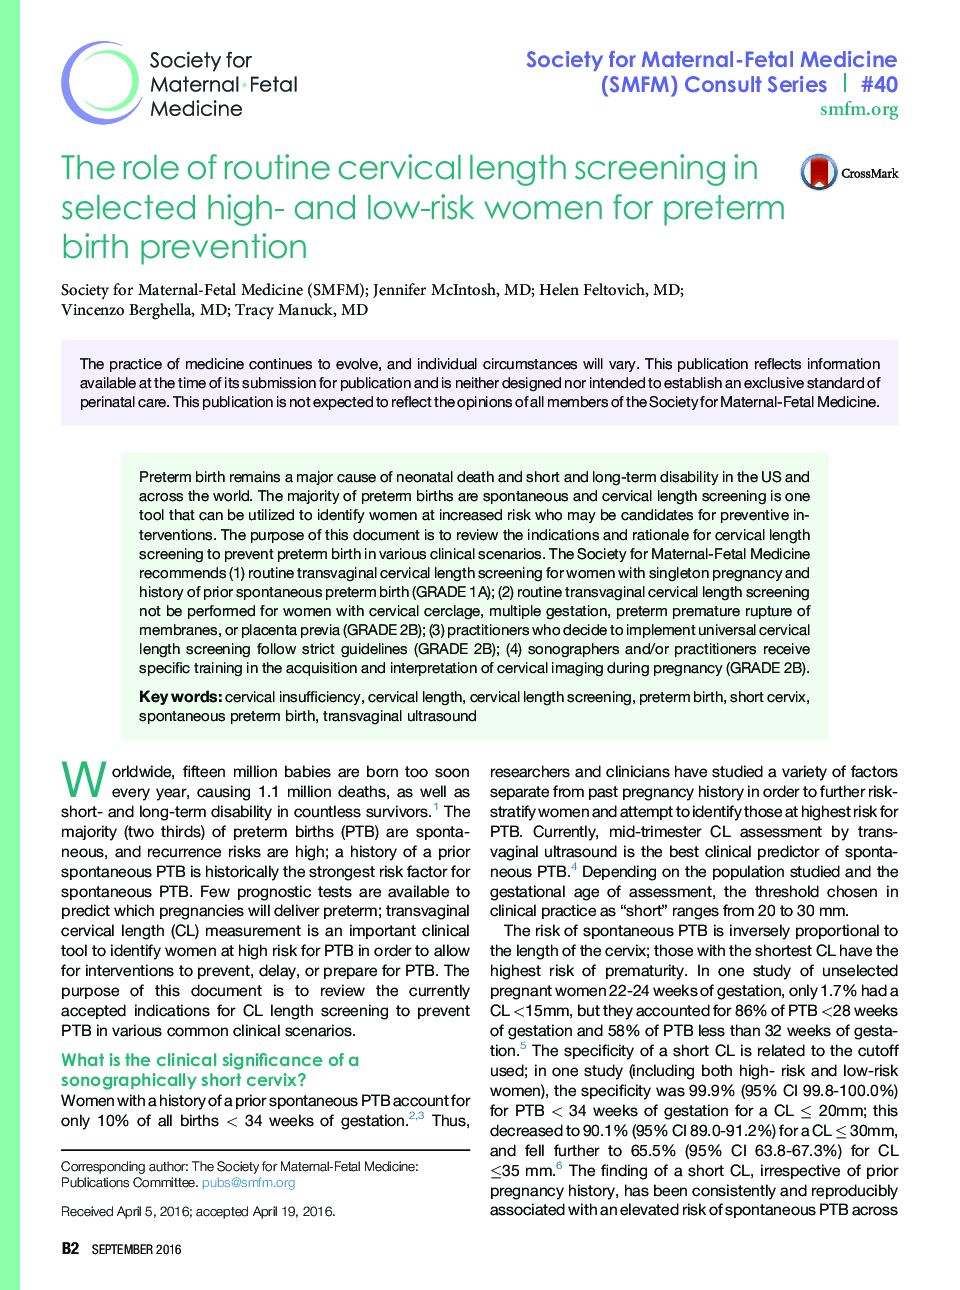 The role of routine cervical length screening in selected high- and low-risk women for preterm birth prevention 